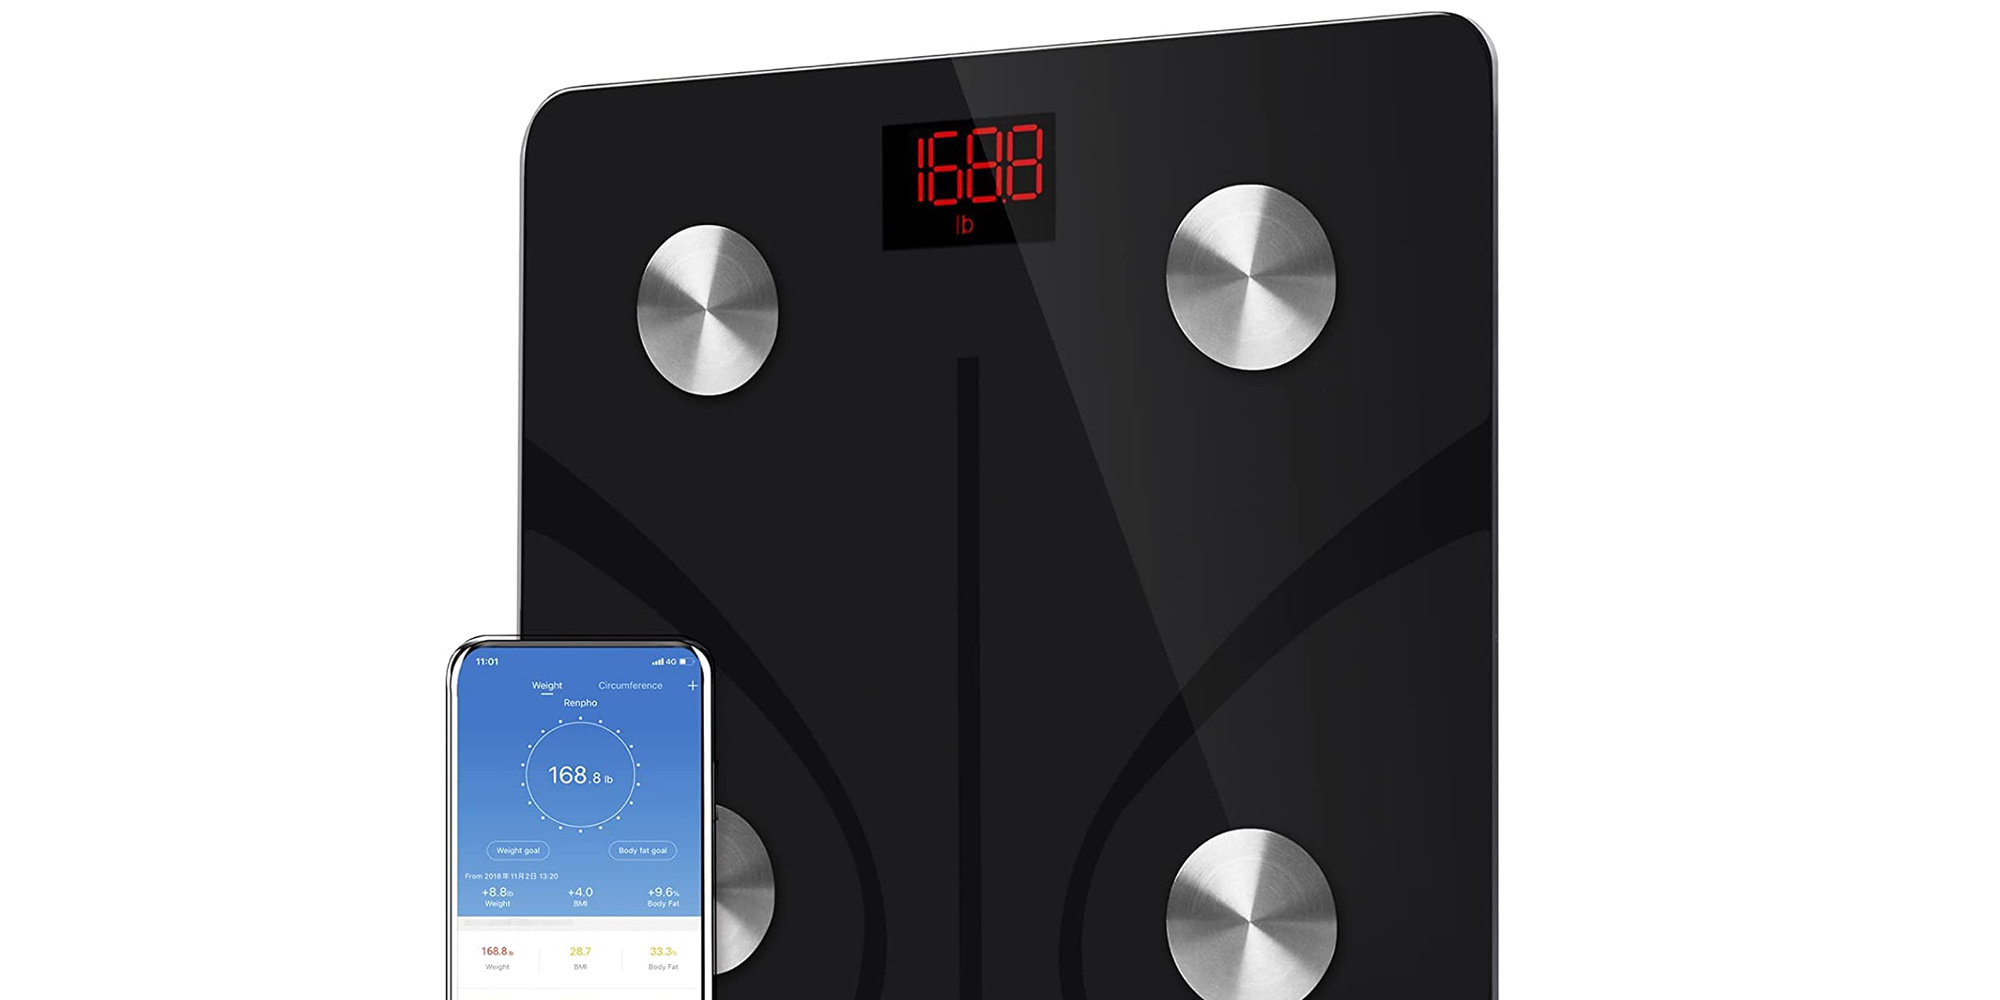 https://9to5toys.com/wp-content/uploads/sites/5/2022/06/RENPHO-Smart-BMI-Scale.jpg